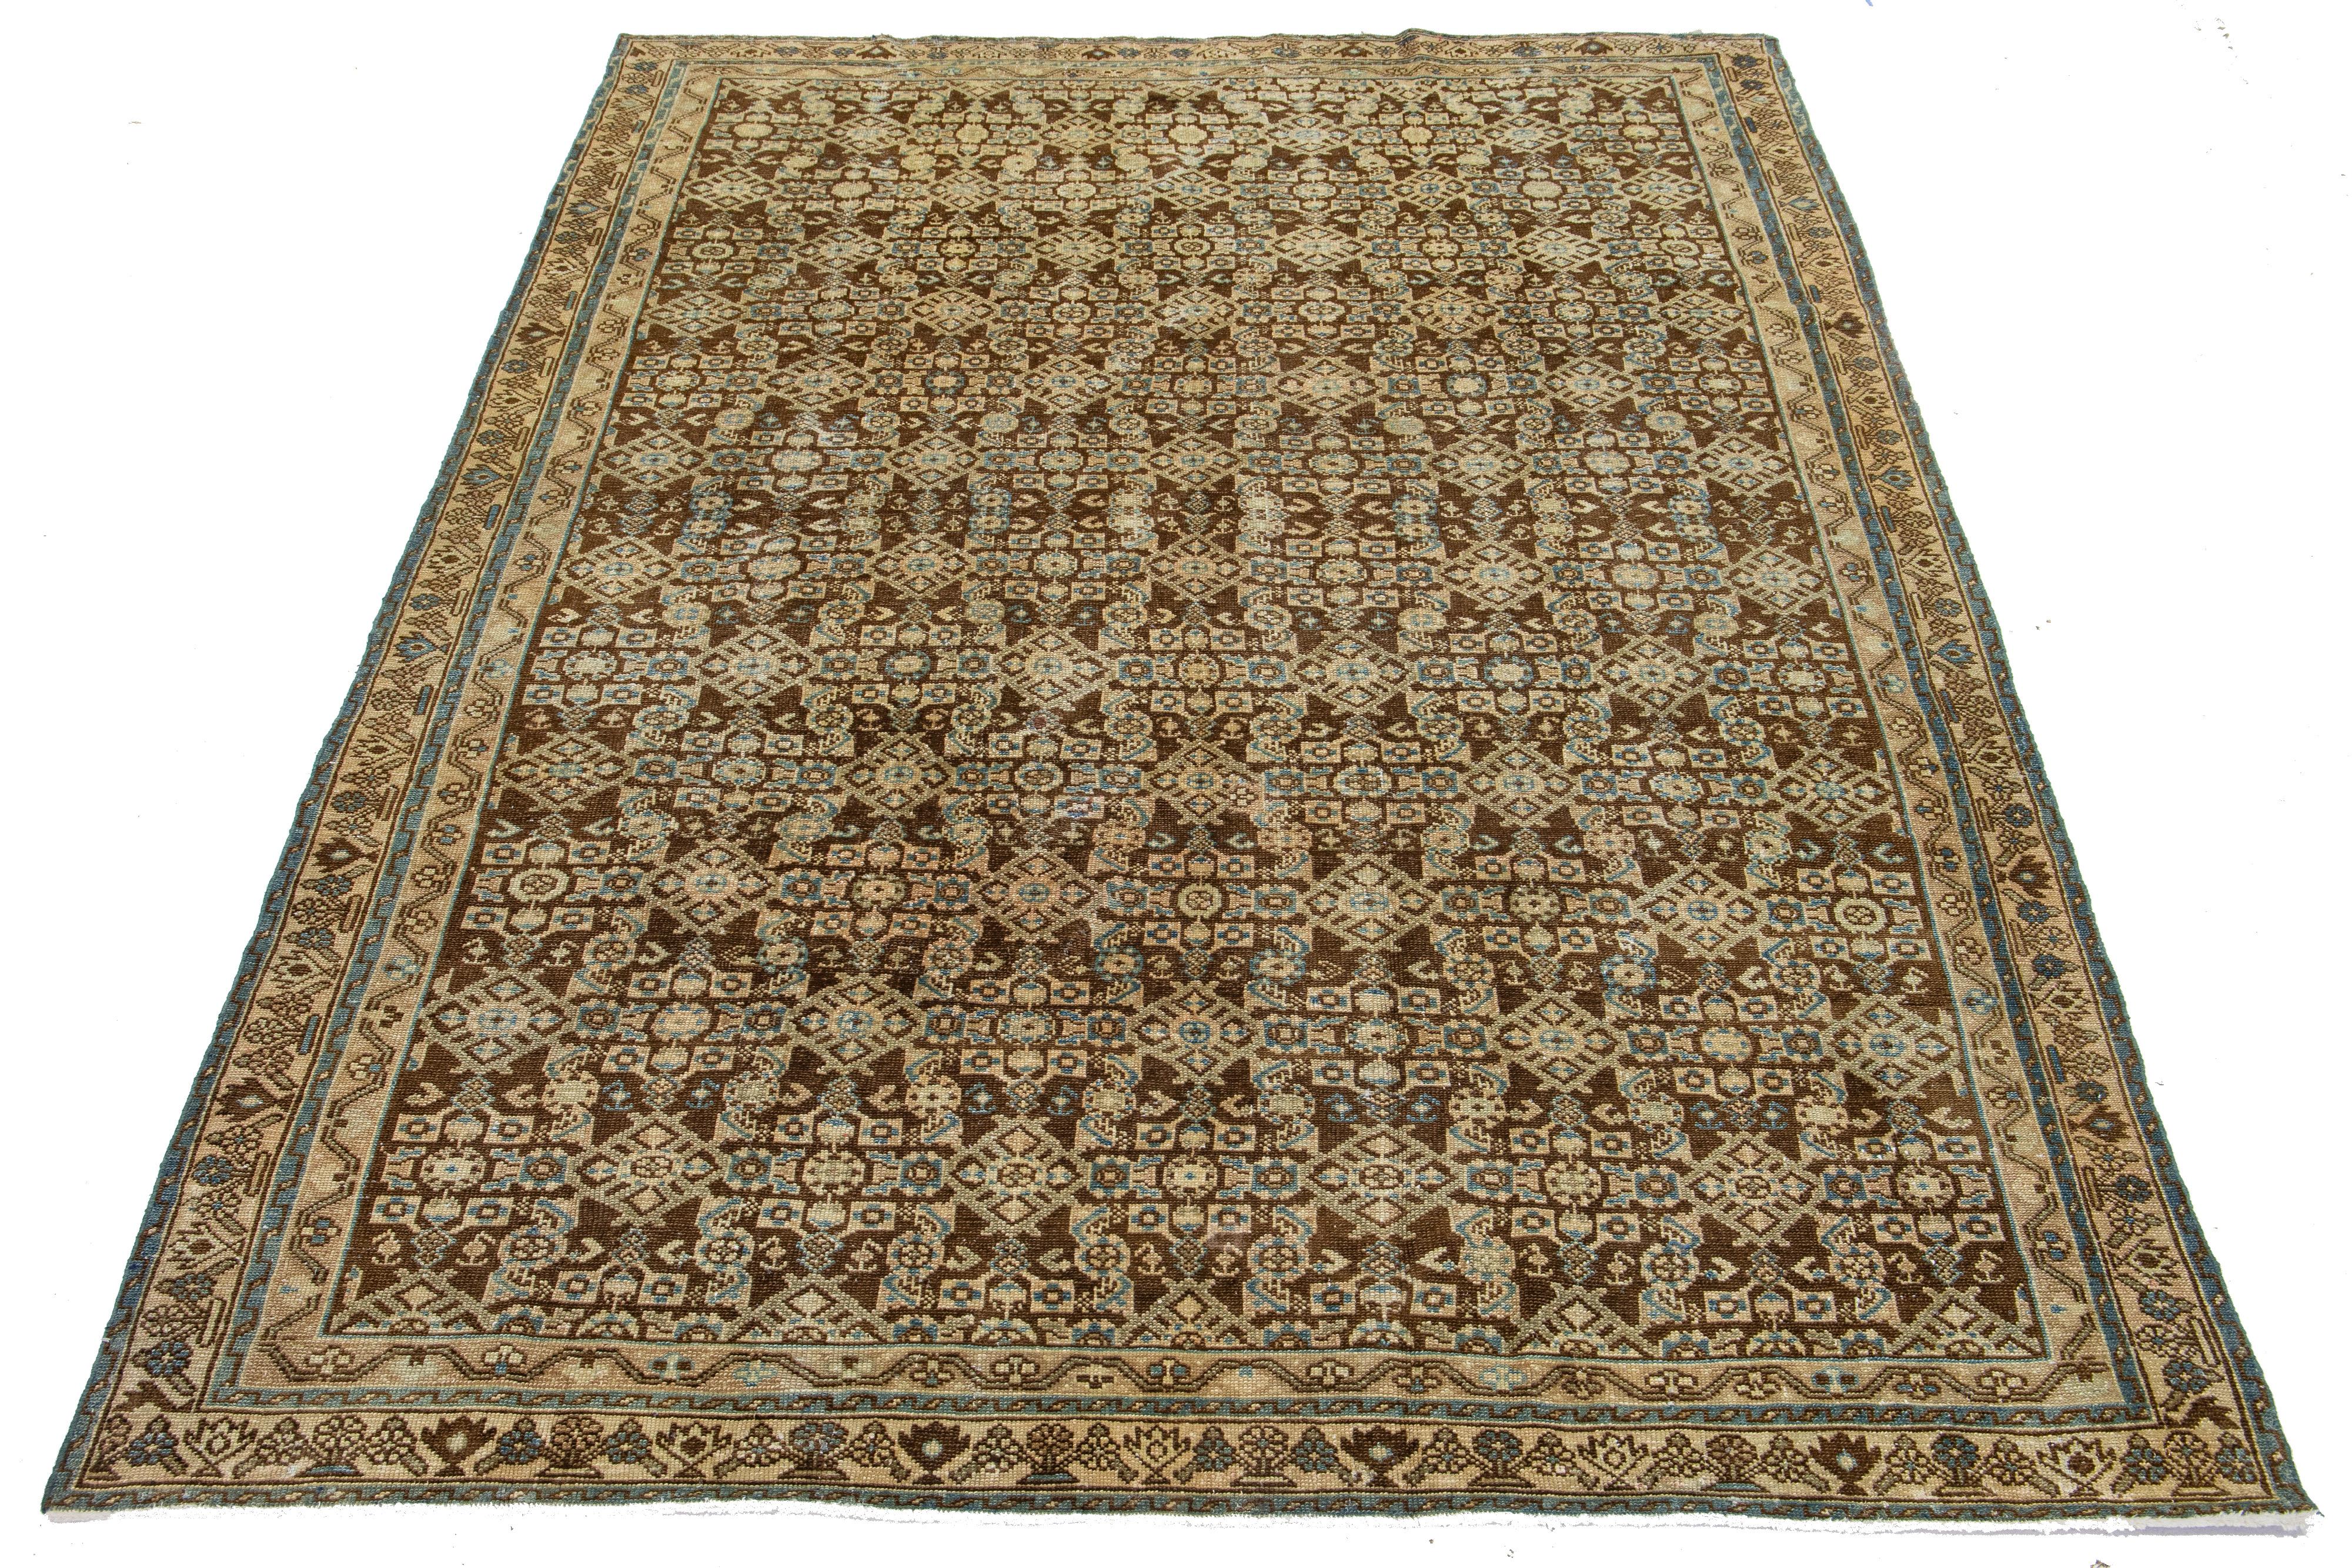 This is a handmade Persian Malayer rug from the 20th century. It has a brown field with blue and beige accents throughout the design.

This rug measures 6'6